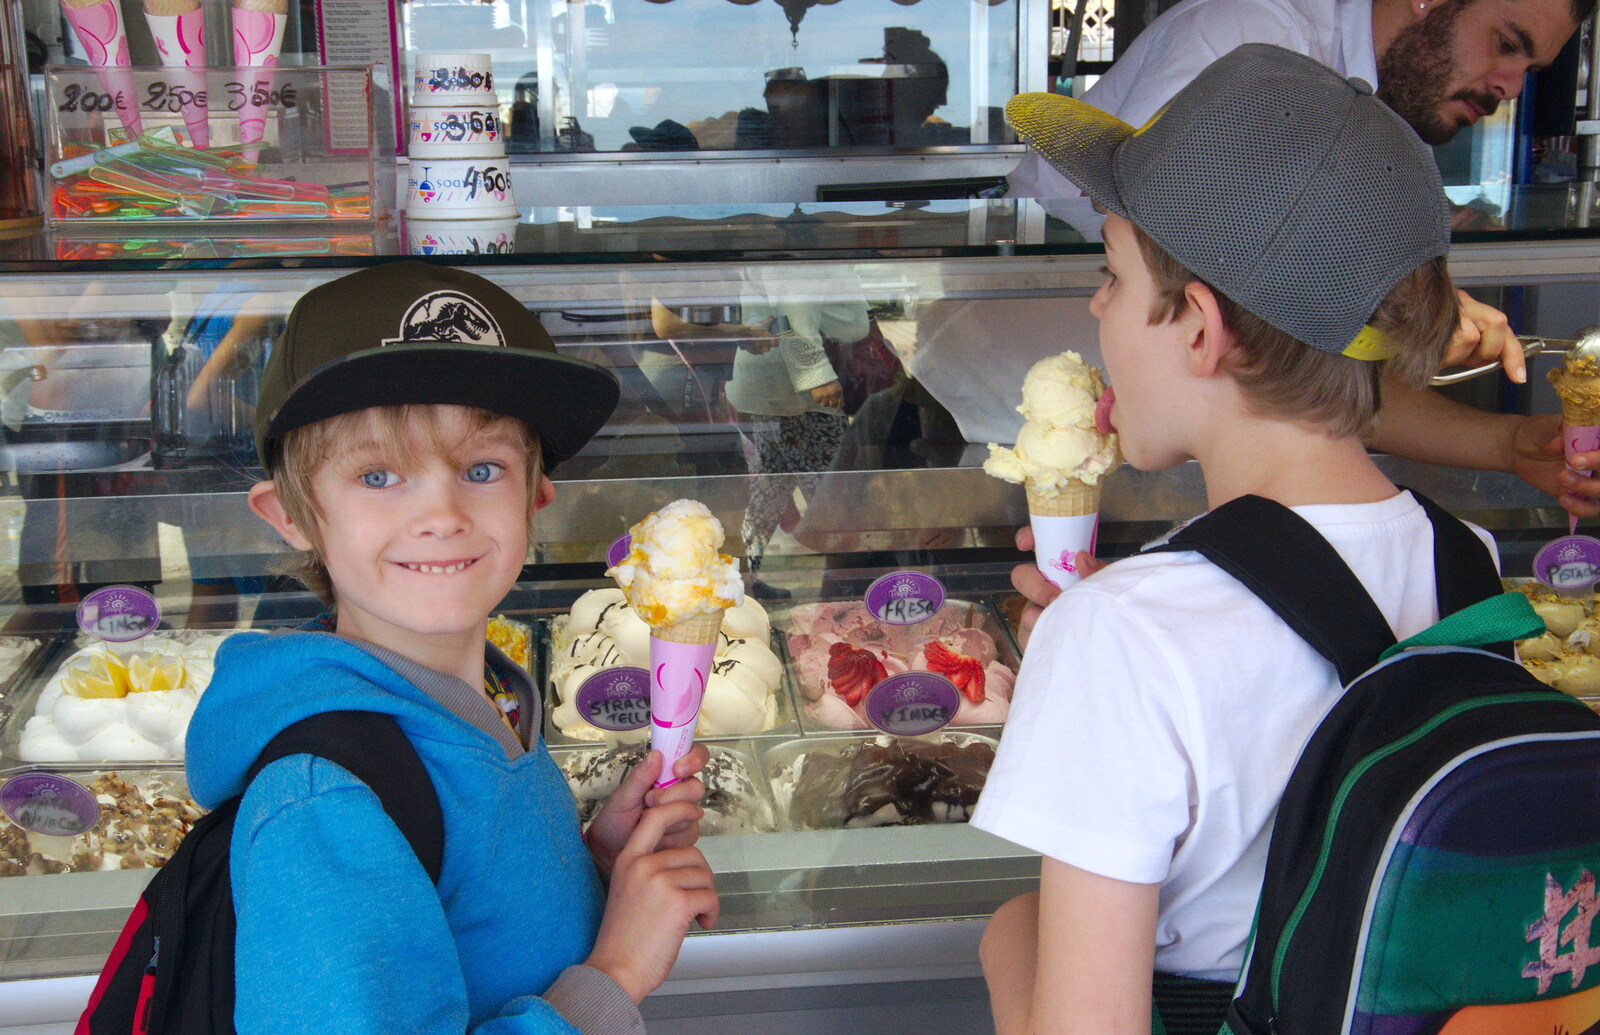 The boys are quite happy to score ice cream again from A Walk up a Hill, Paella on the Beach and Granada, Andalusia, Spain - 19th April 2018